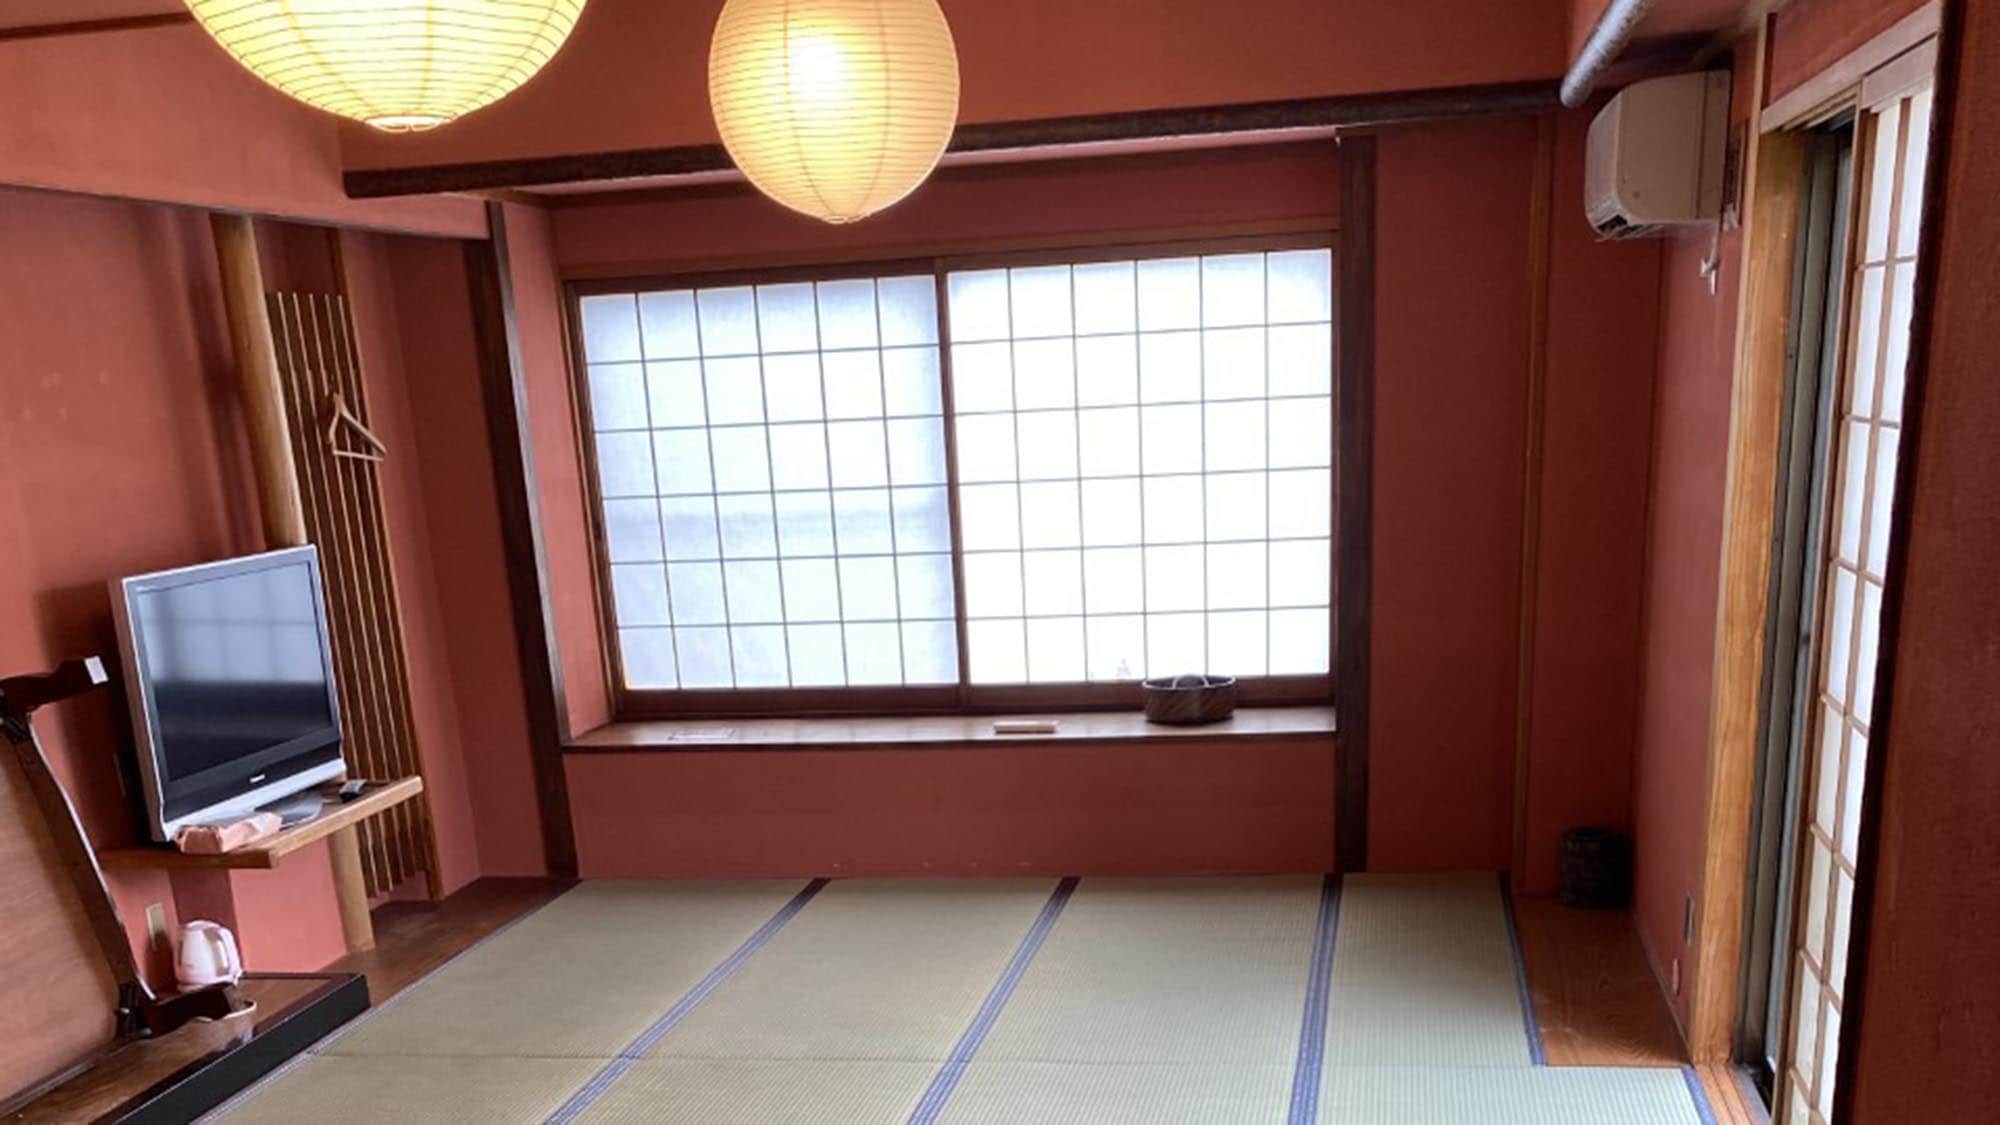 ・ [Guest room] Overlooking the view of Nara Yamato! Superior Japanese-style room (16 tatami mats + stepping / 36 square meters)